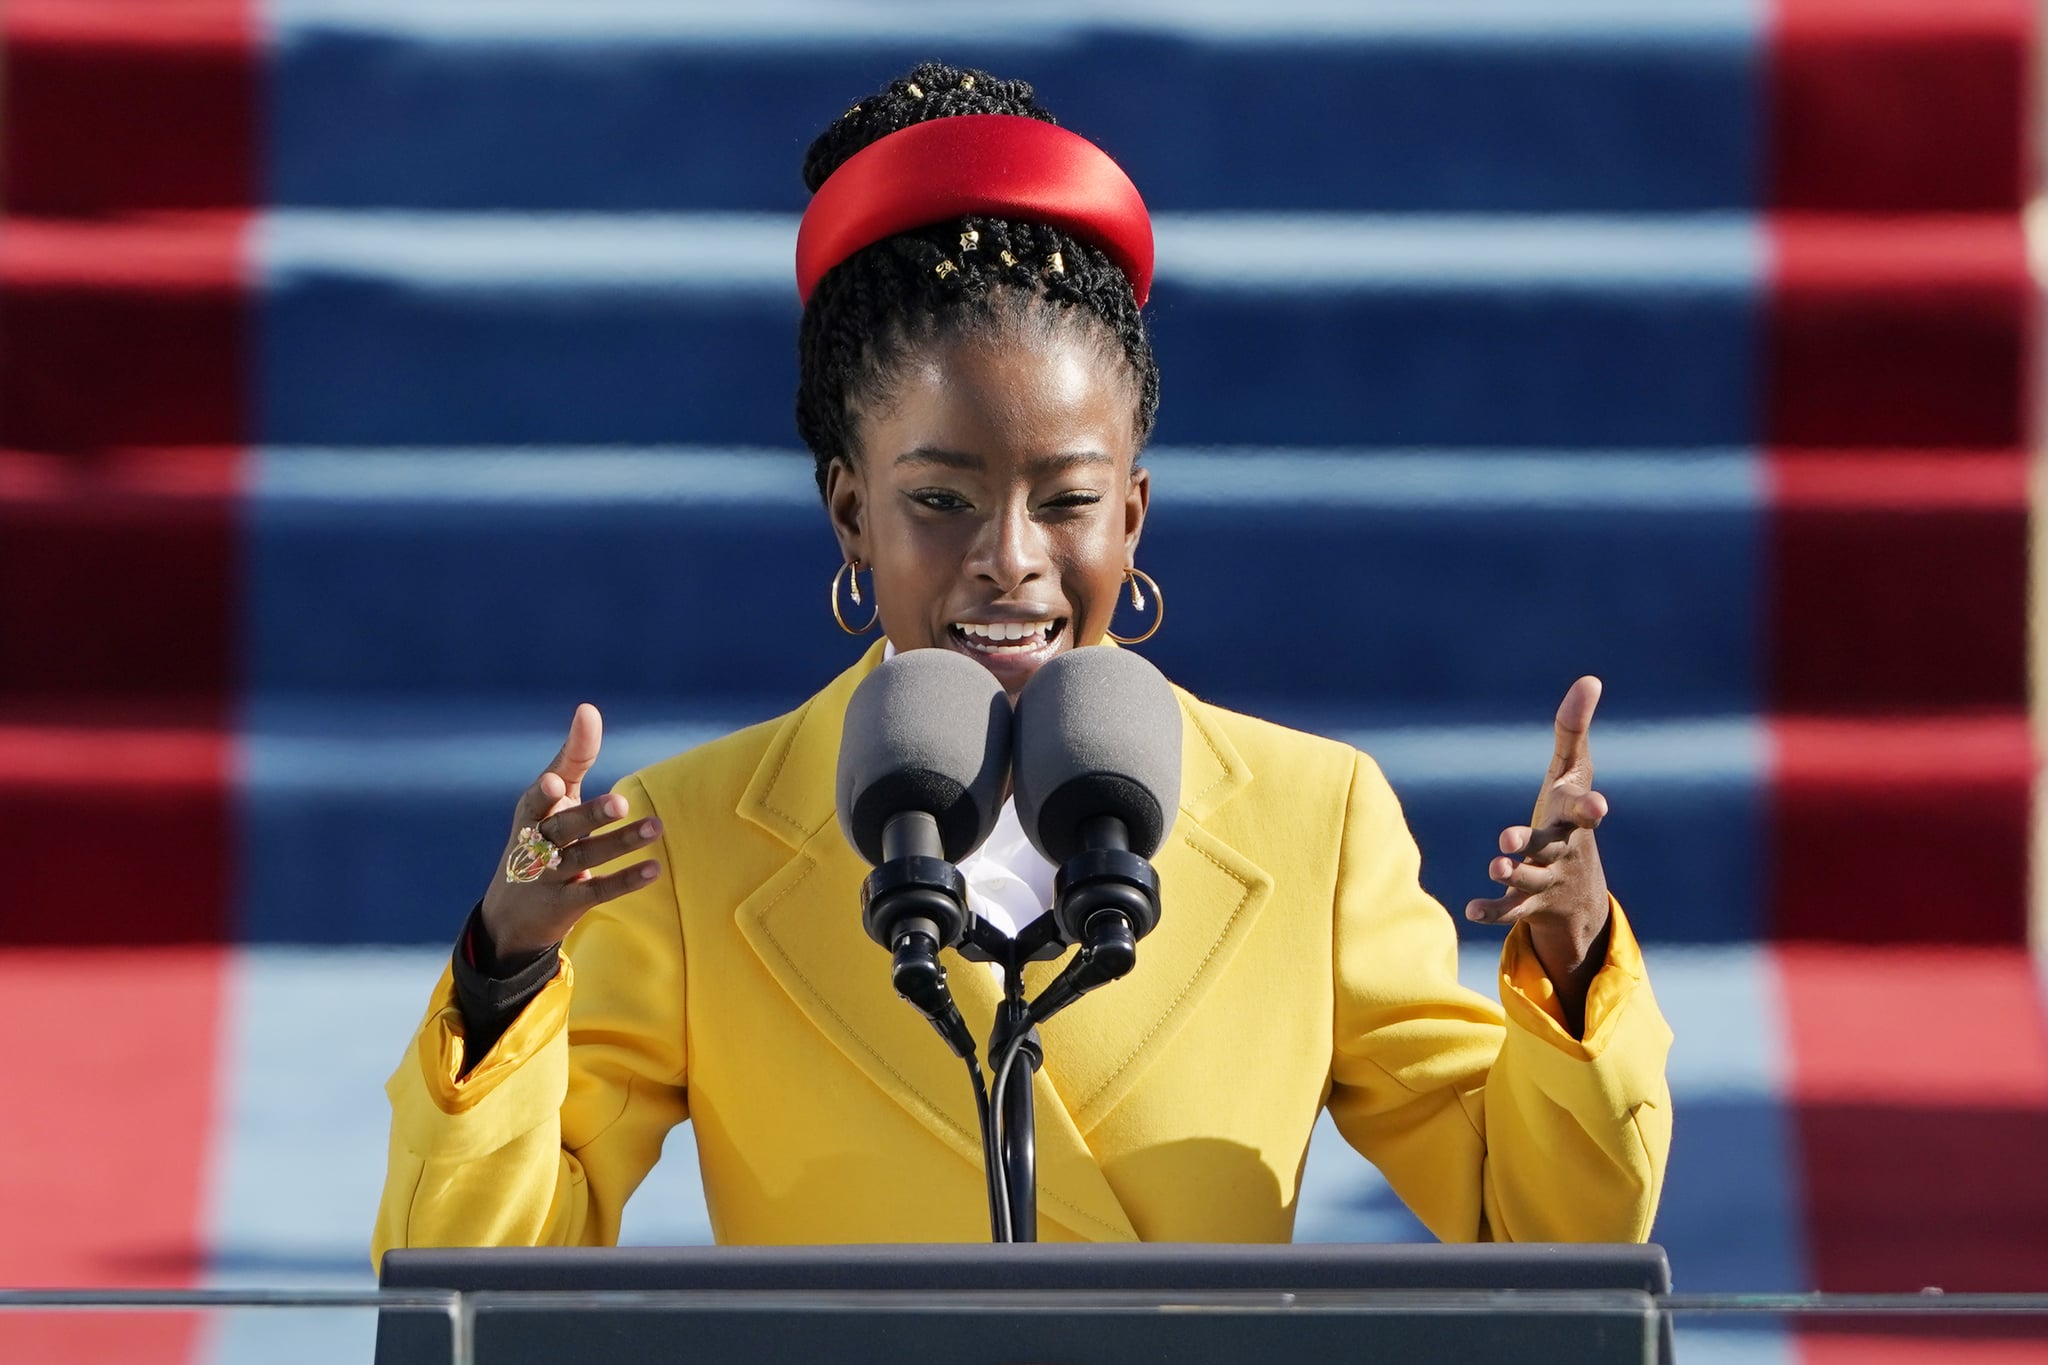 WASHINGTON, DC - JANUARY 20: American poet Amanda Gorman reads a poem during the the 59th inaugural ceremony on the West Front of the U.S. Capitol on January 20, 2021 in Washington, DC.  During today's inauguration ceremony Joe Biden becomes the 46th president of the United States. (Photo by Patrick Semansky-Pool/Getty Images)